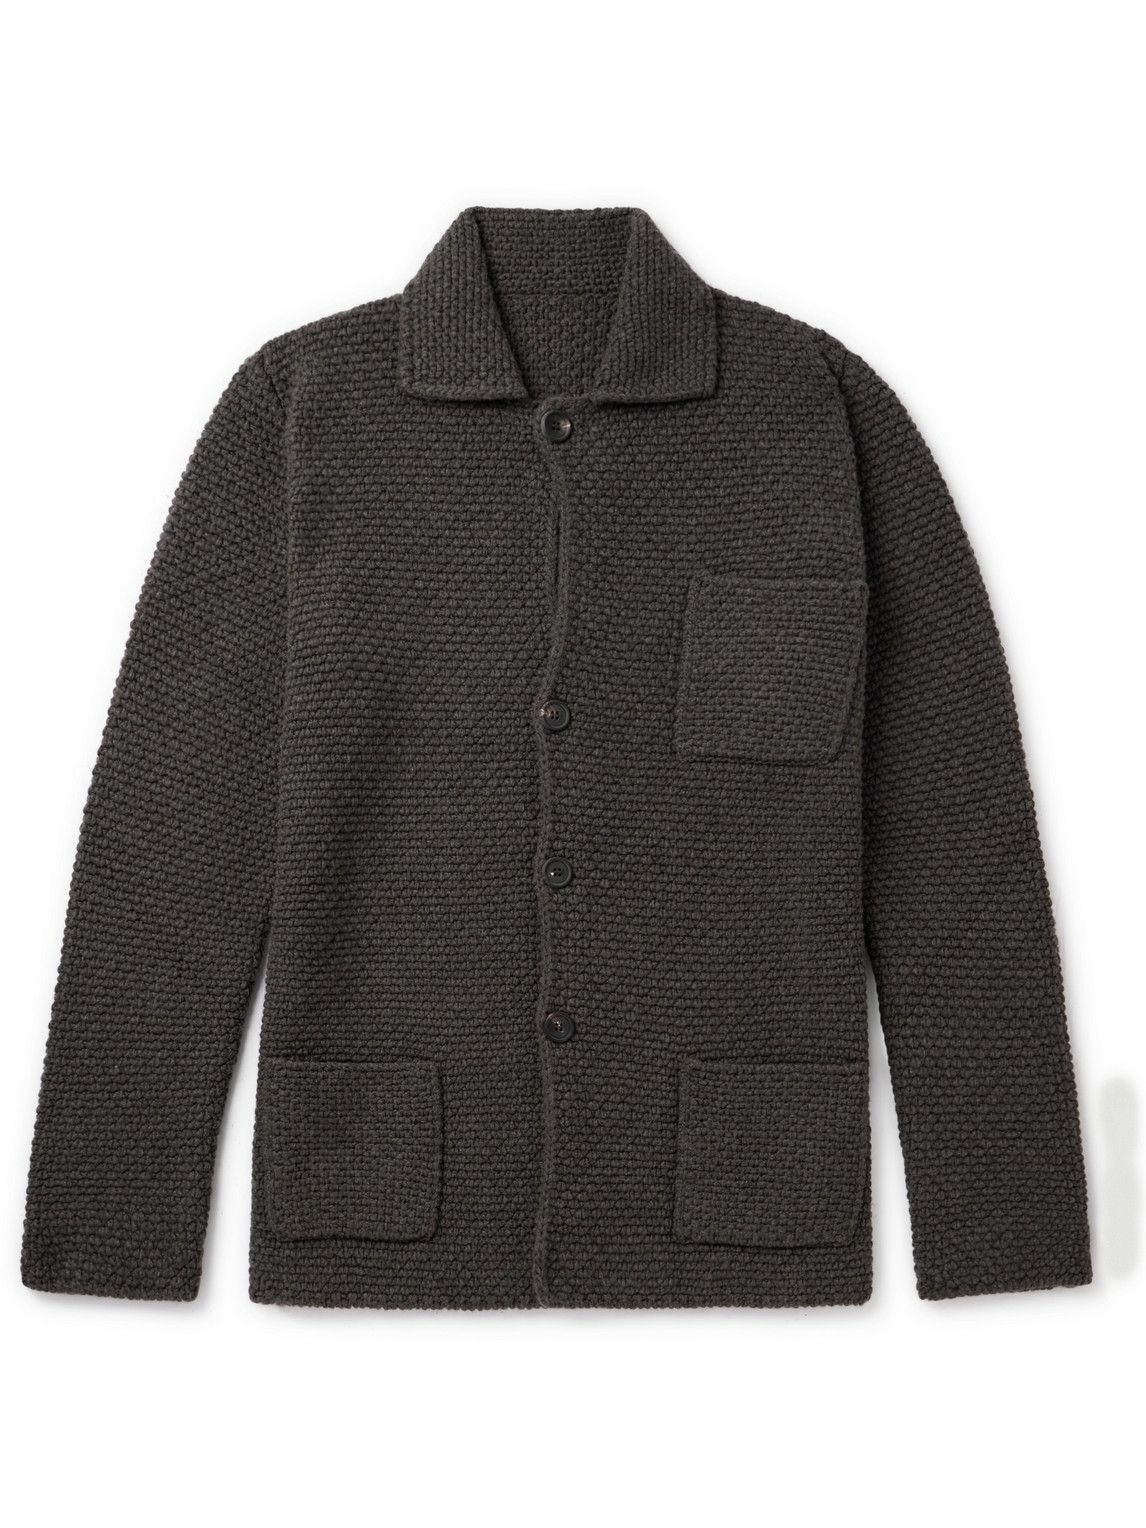 Photo: Anderson & Sheppard - Slim-Fit Textured Wool and Cashmere-Blend Cardigan - Brown